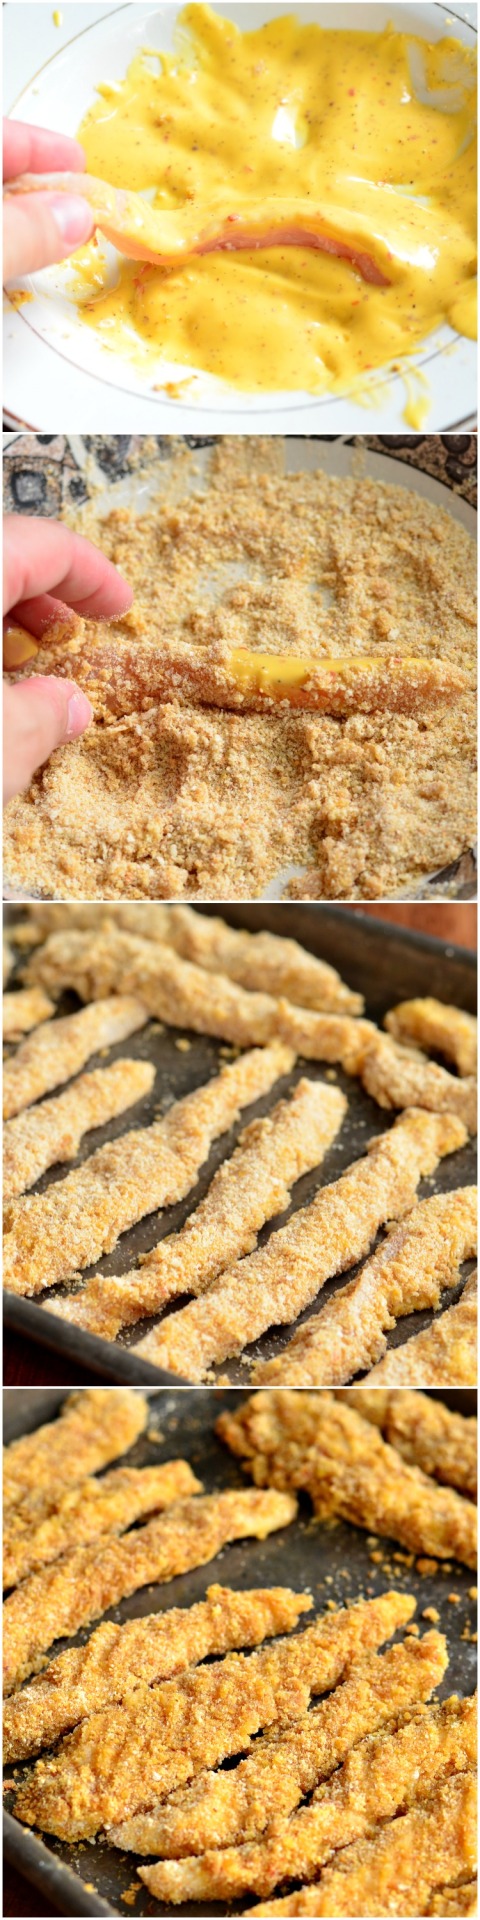 EASY HONEY MUSTARD BAKED CHICKEN FRIES Really nice recipes. Every hour.Show me what you cooked!